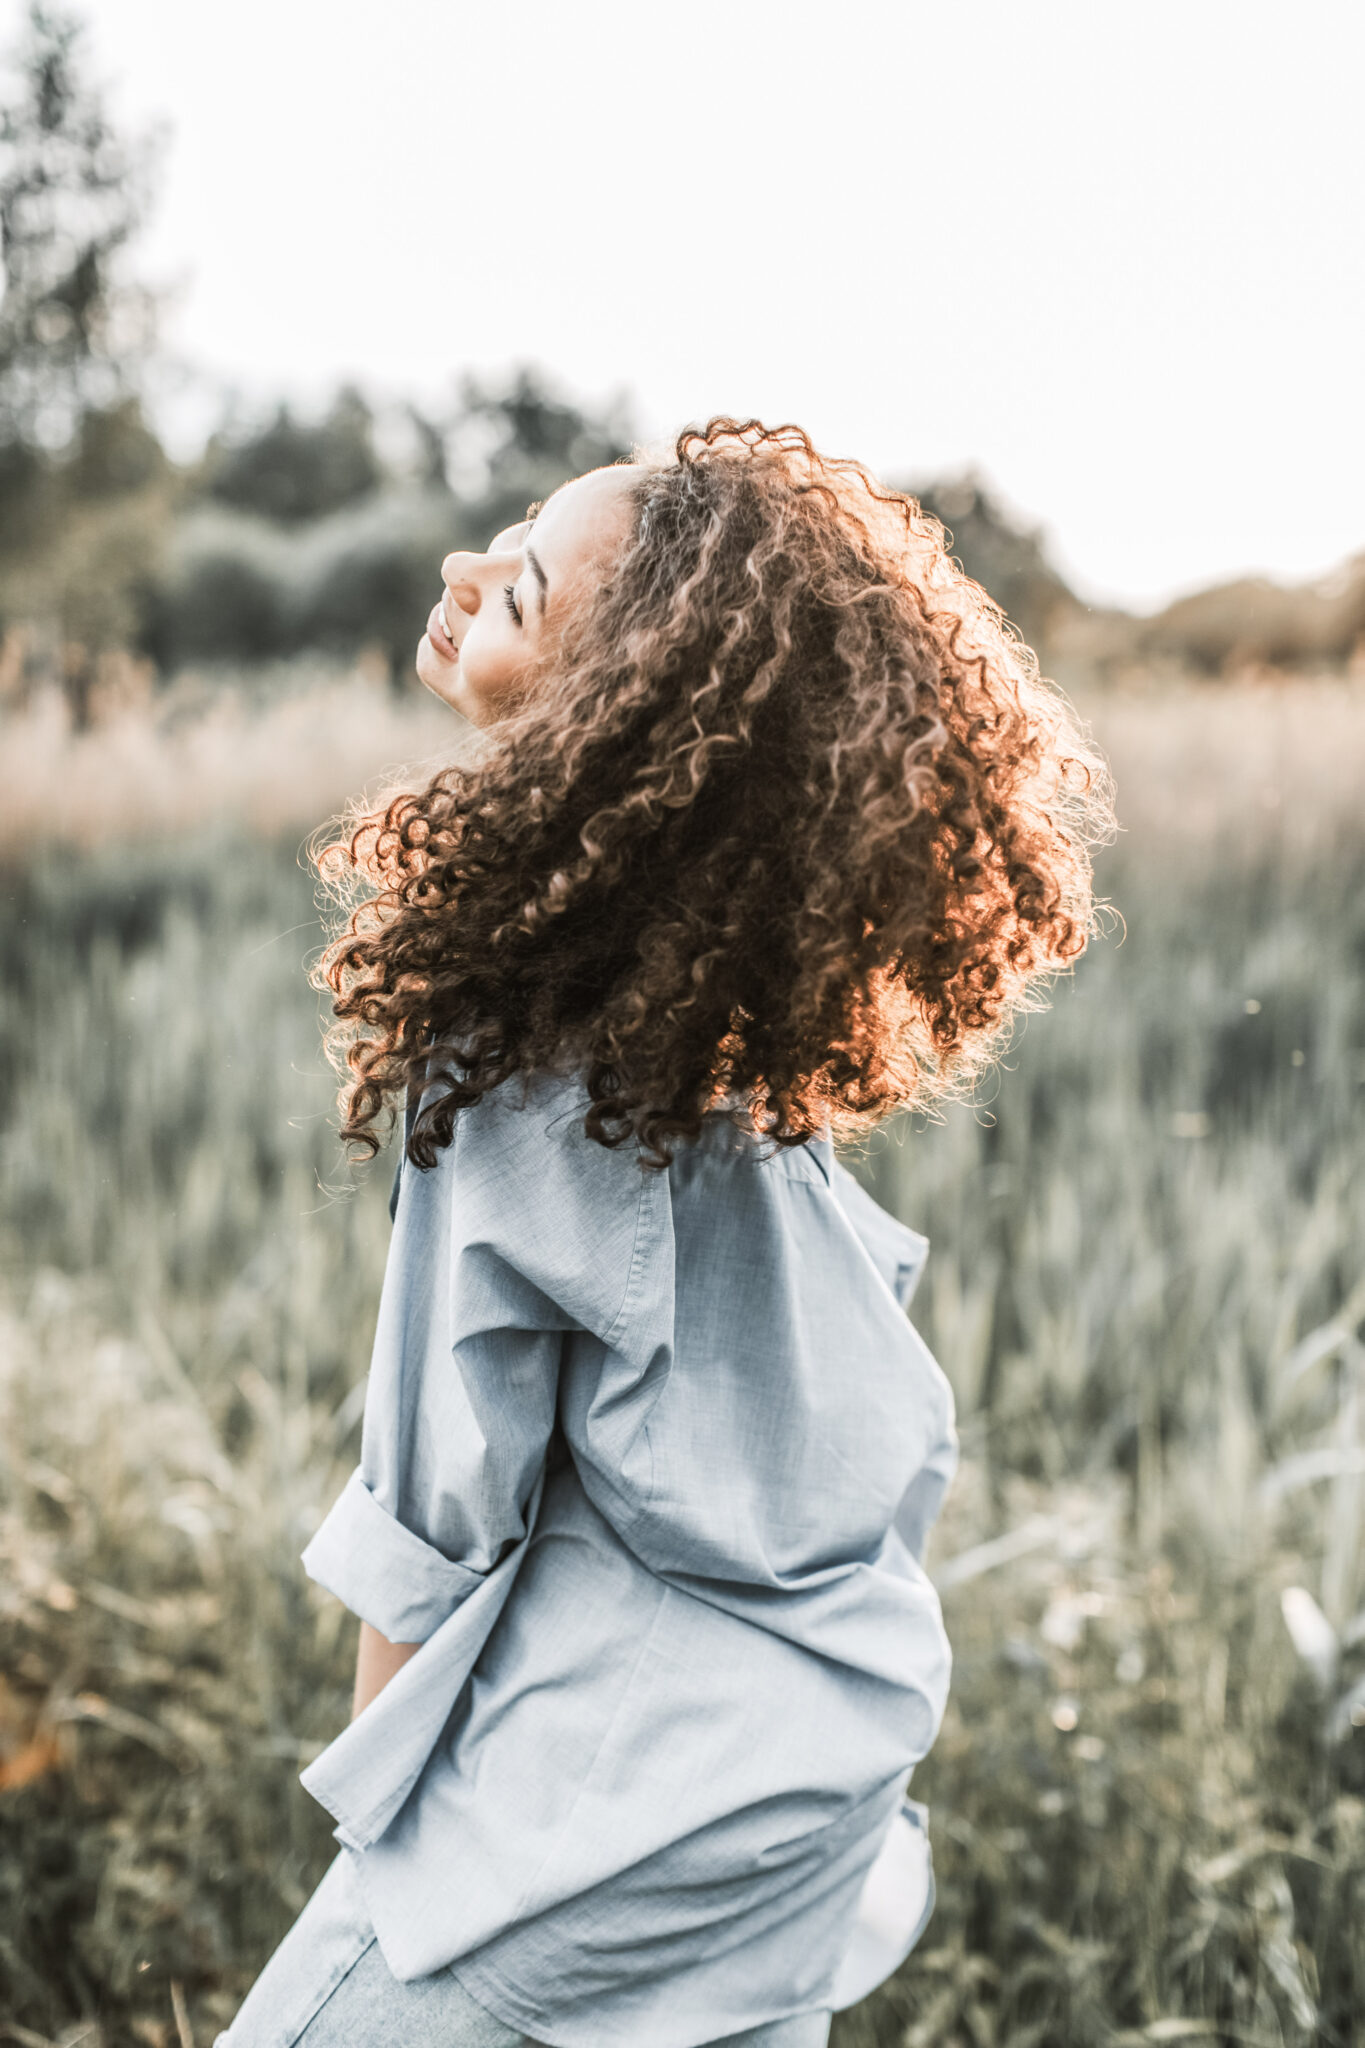 A woman with curly hair joyfully spins in a beautiful trail outside. This post covers 4 essential summer stress relief tips.